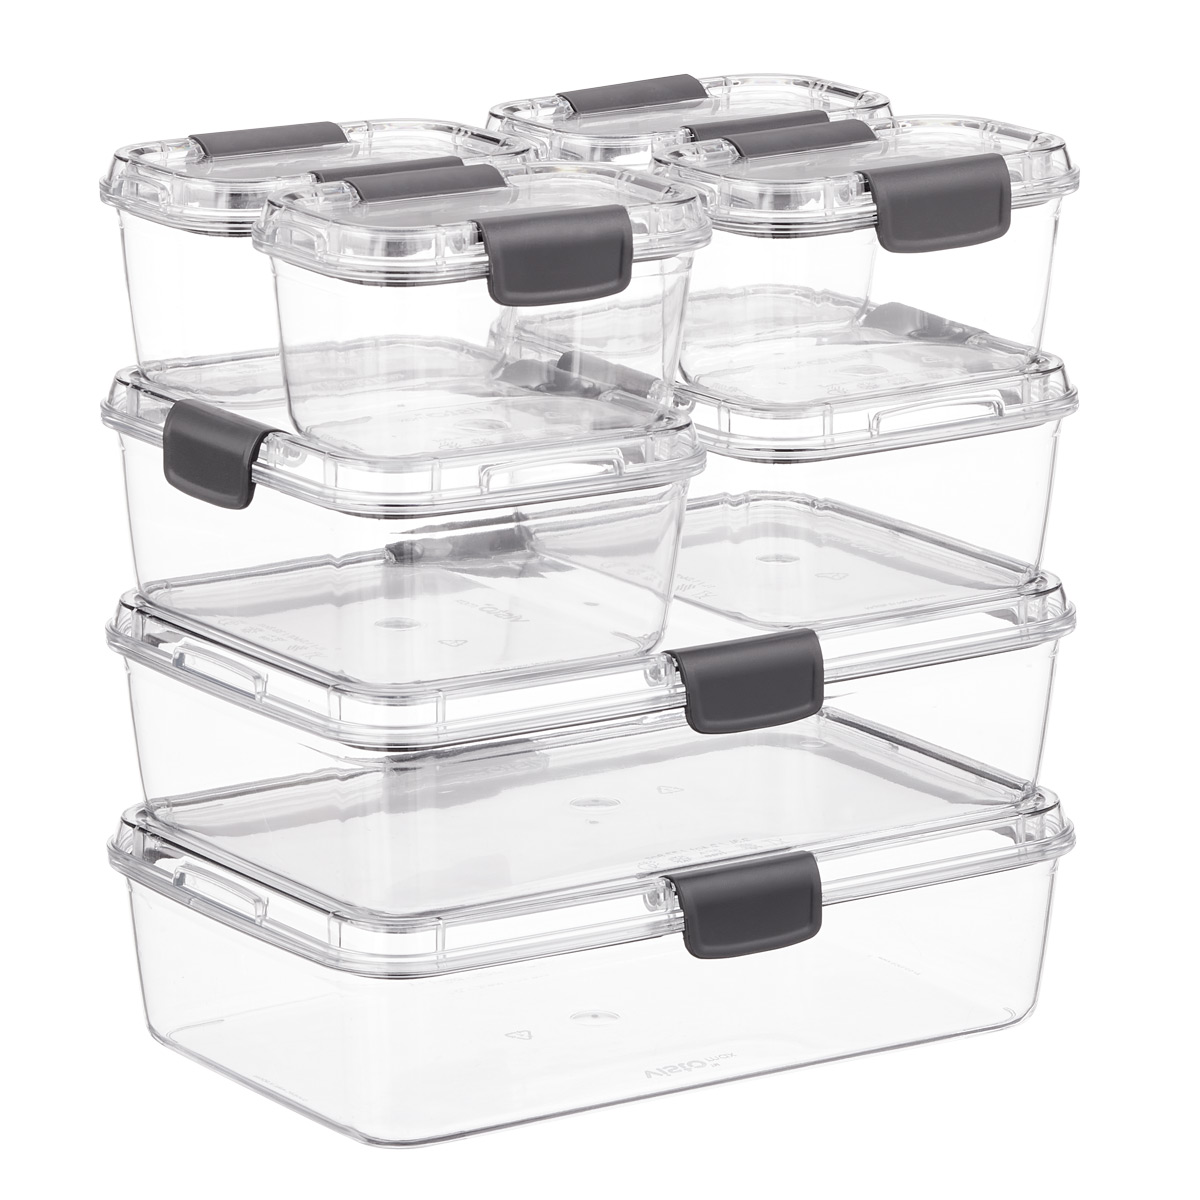 https://www.containerstore.com/catalogimages/438079/10083918_Titan_Food_Storage_Set_Of_8.jpg